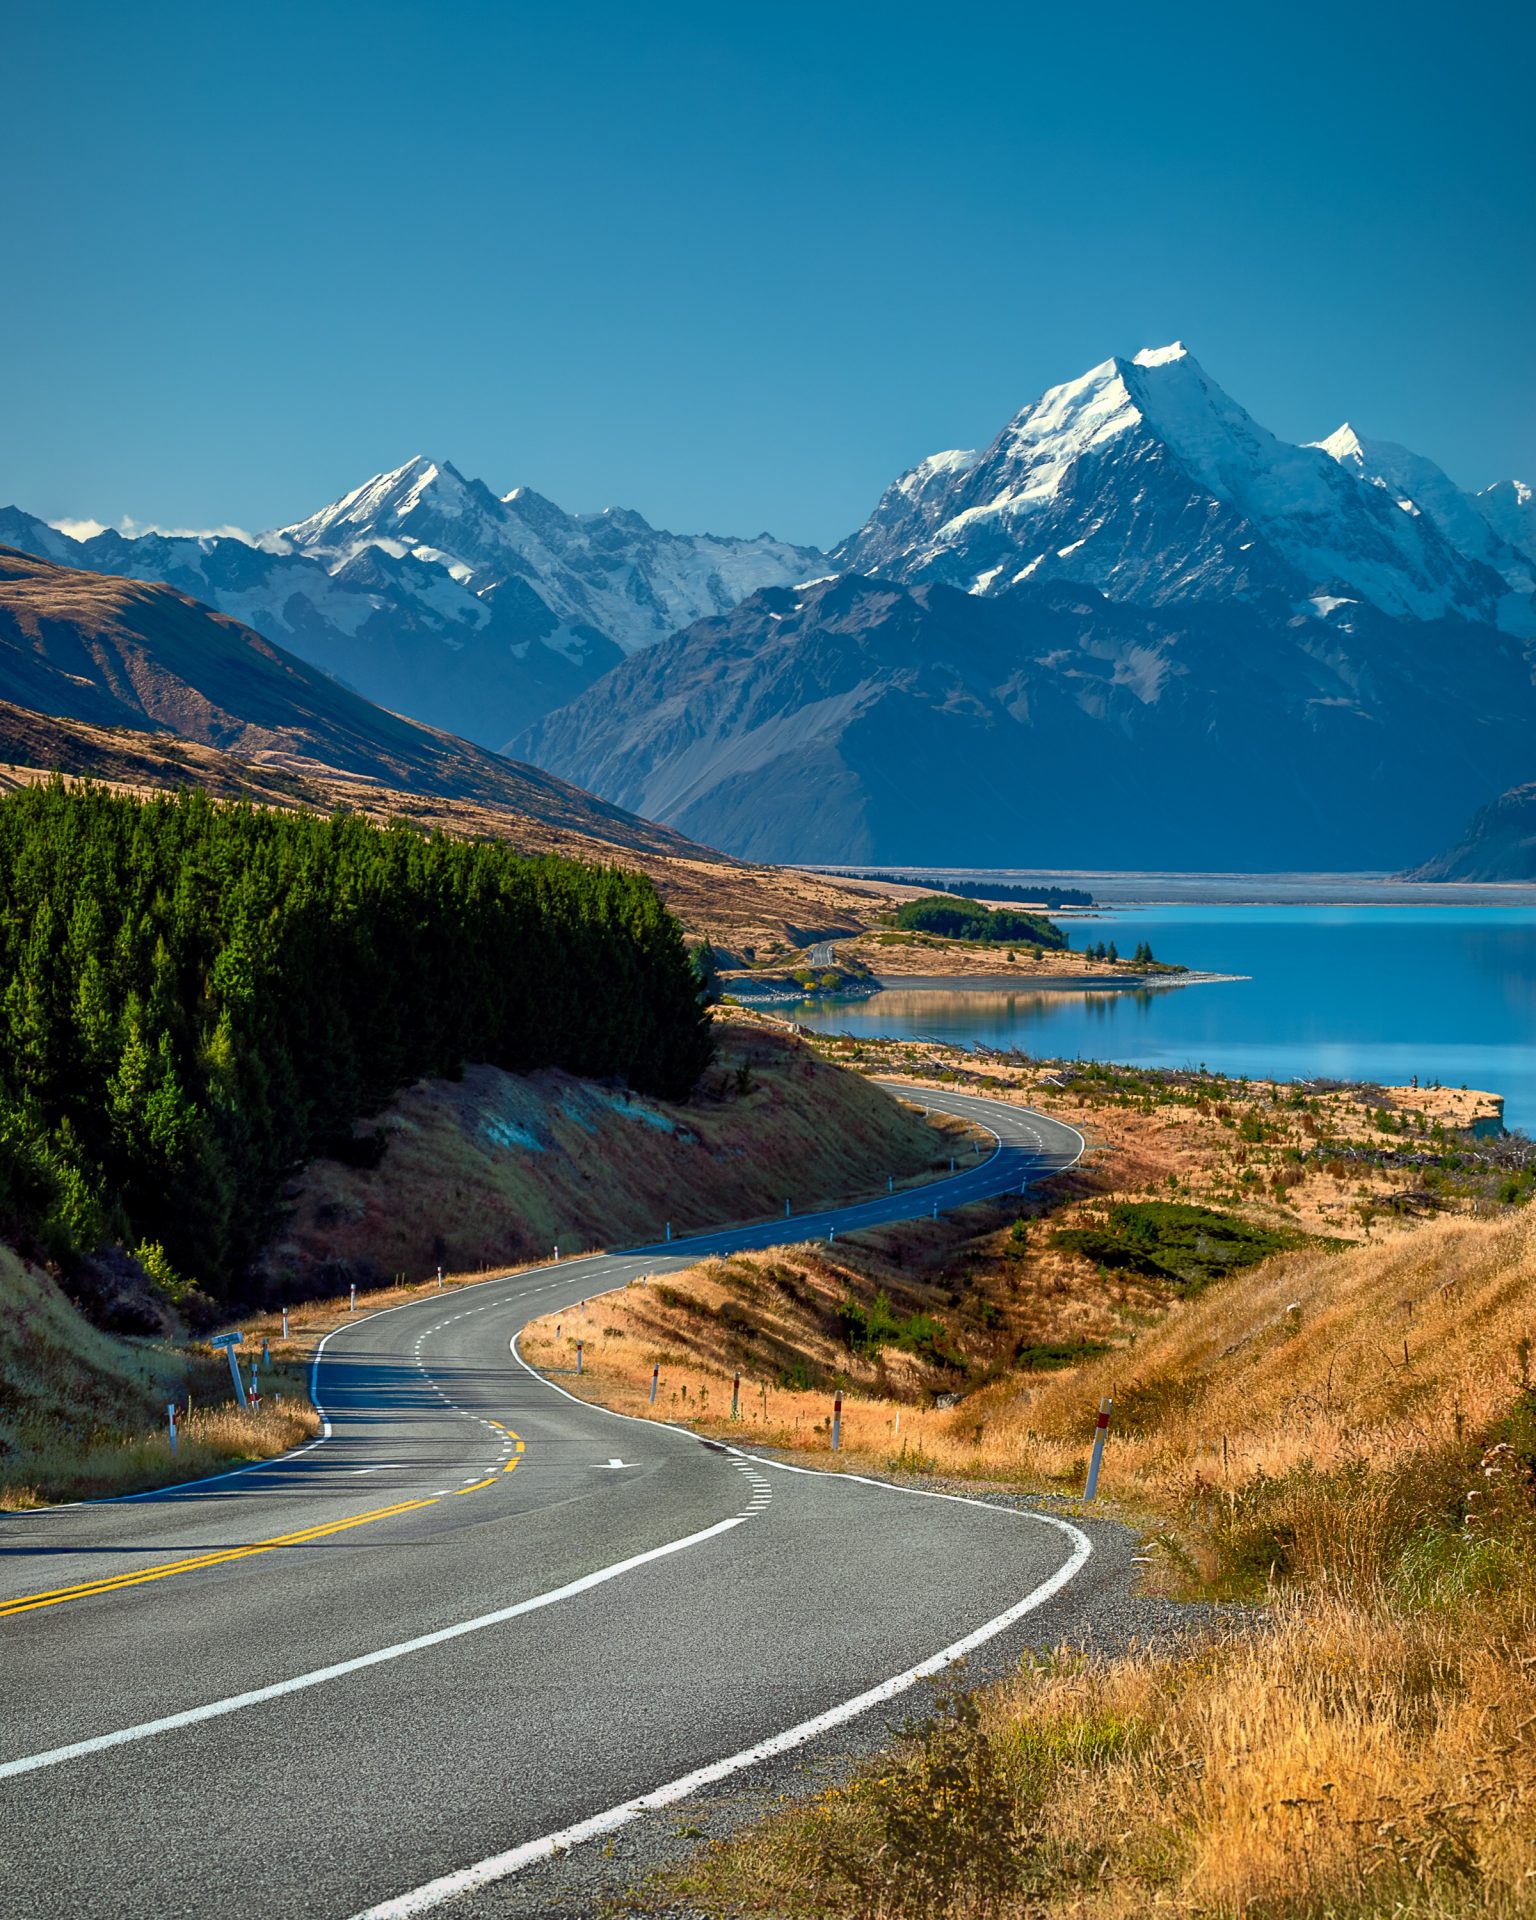 The road to Mount Cook